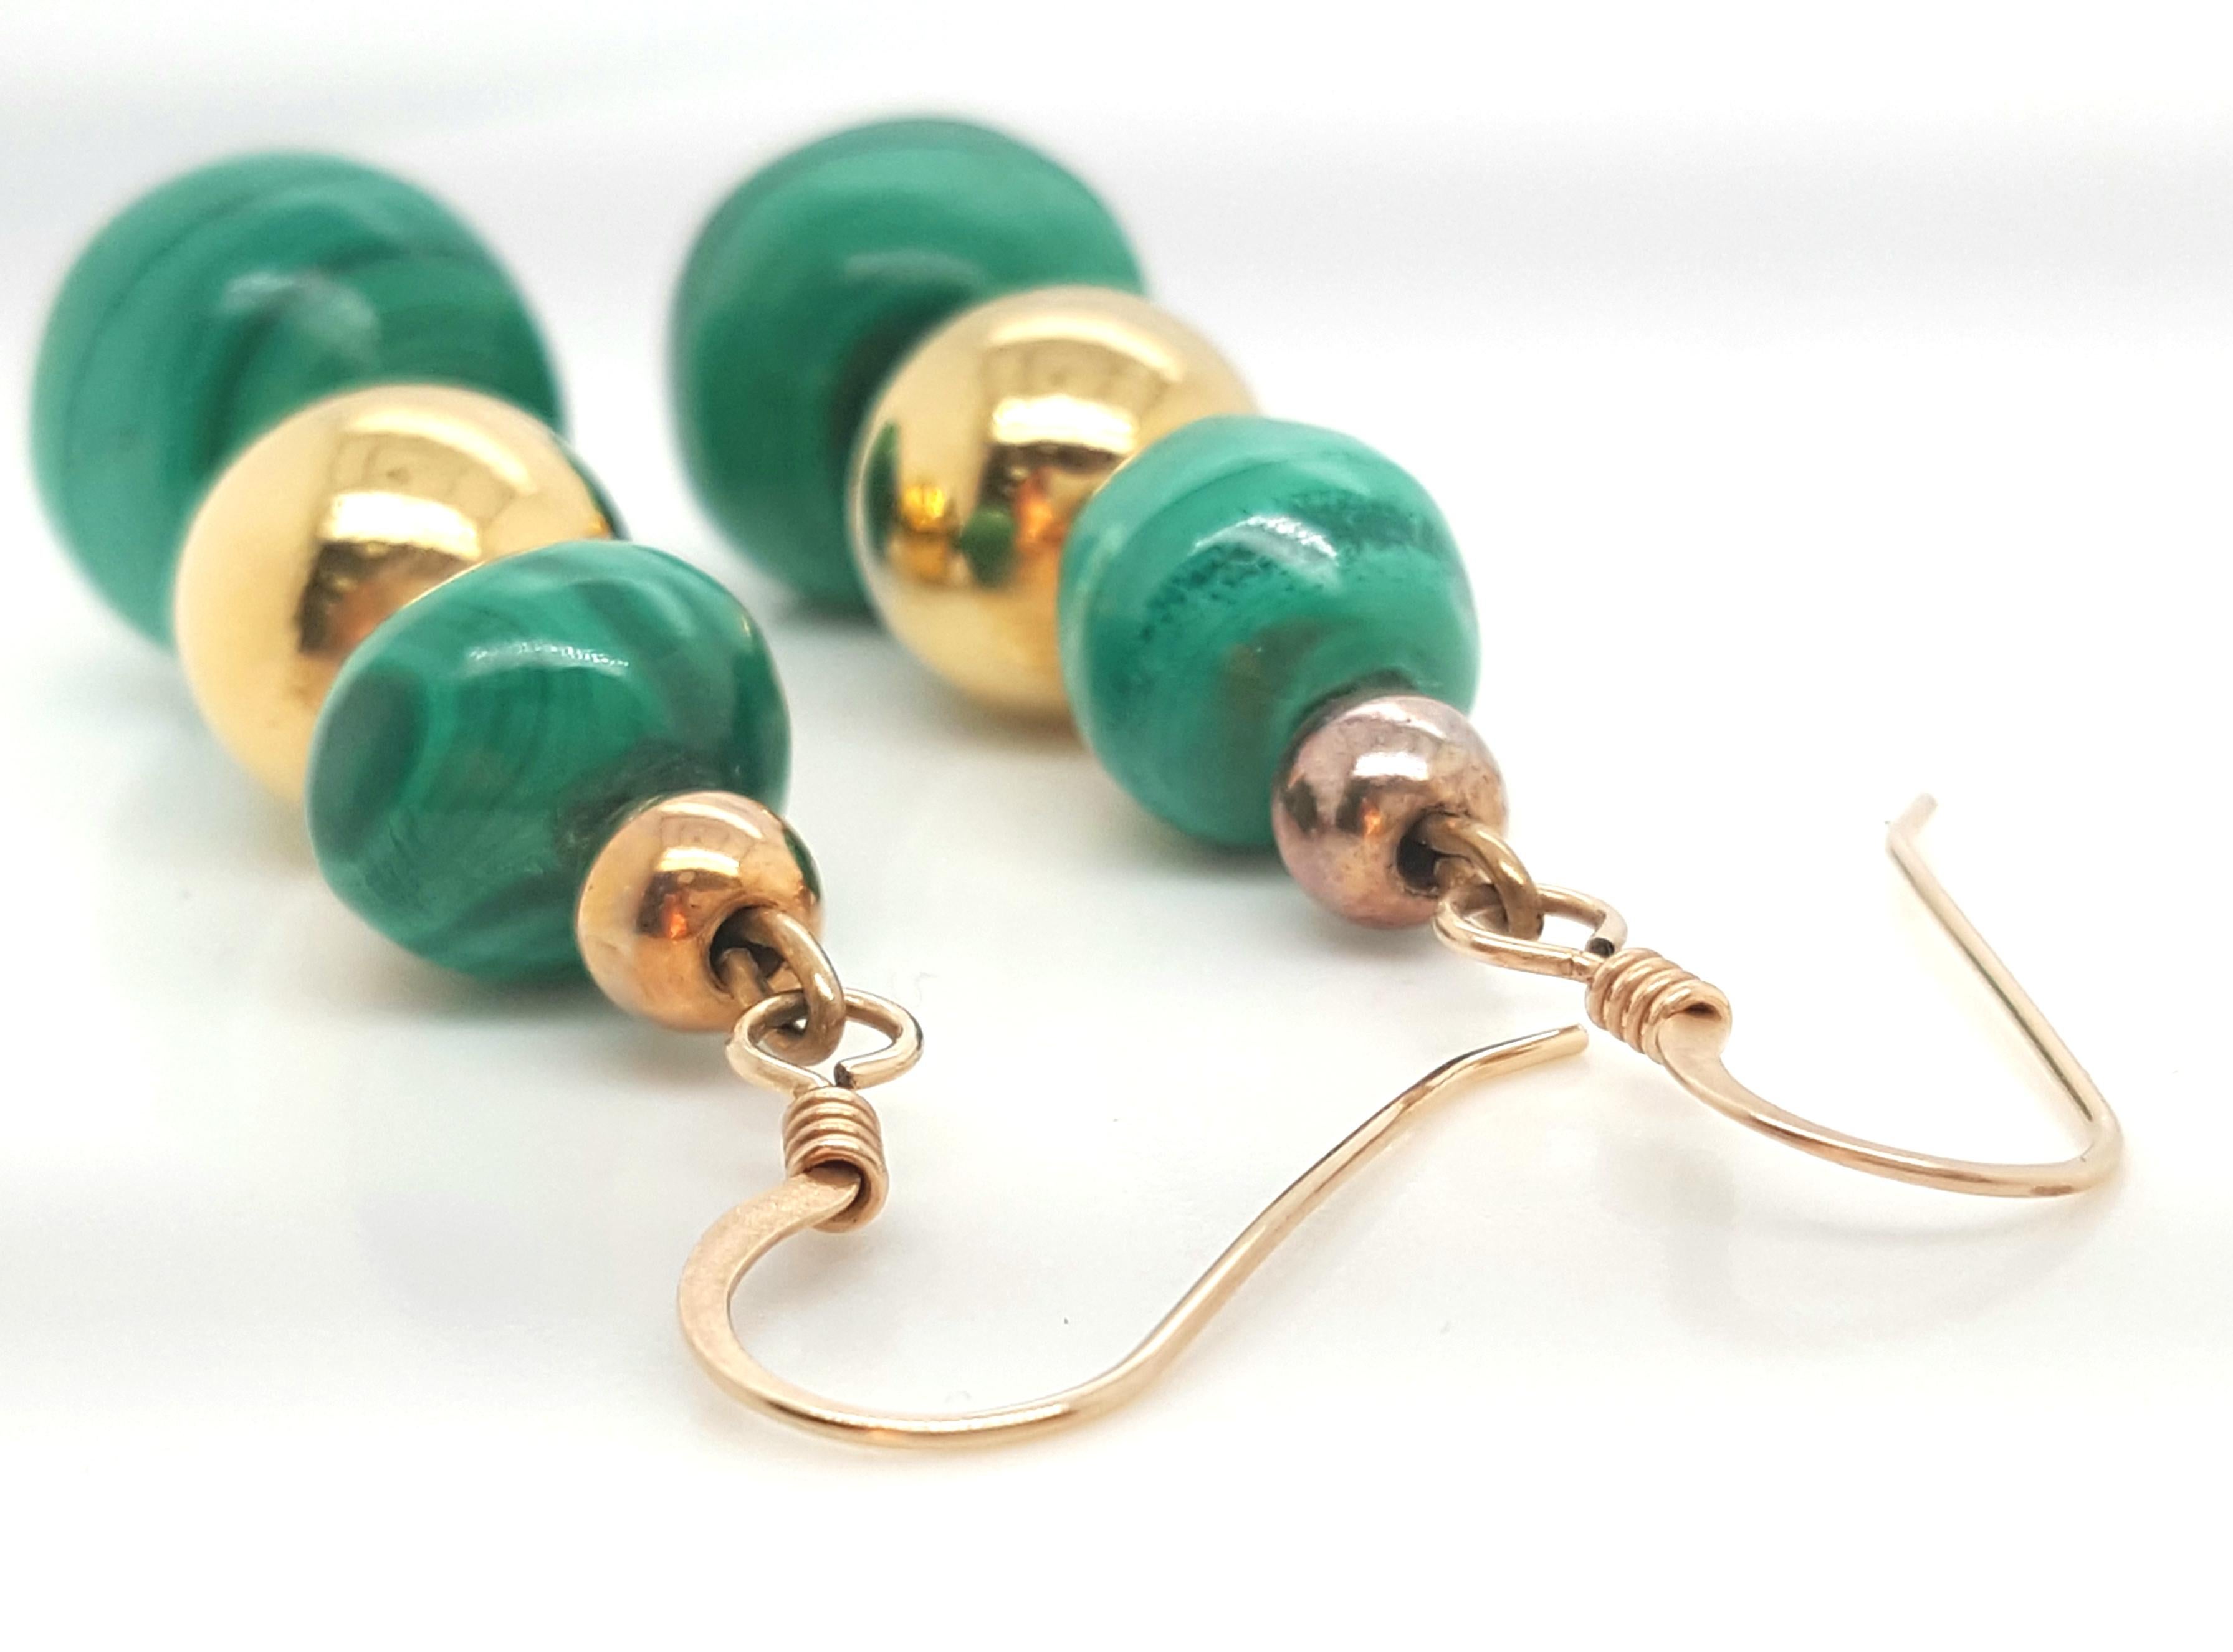 Graduated Malachite Bead Earrings Accented by Gold Plated Beads are mesmerizing.  The earrings are each composed of  two malachite beads alternating with gold plated beads for a perfect accent and is finished with a sheperd's hook.  The earrings are